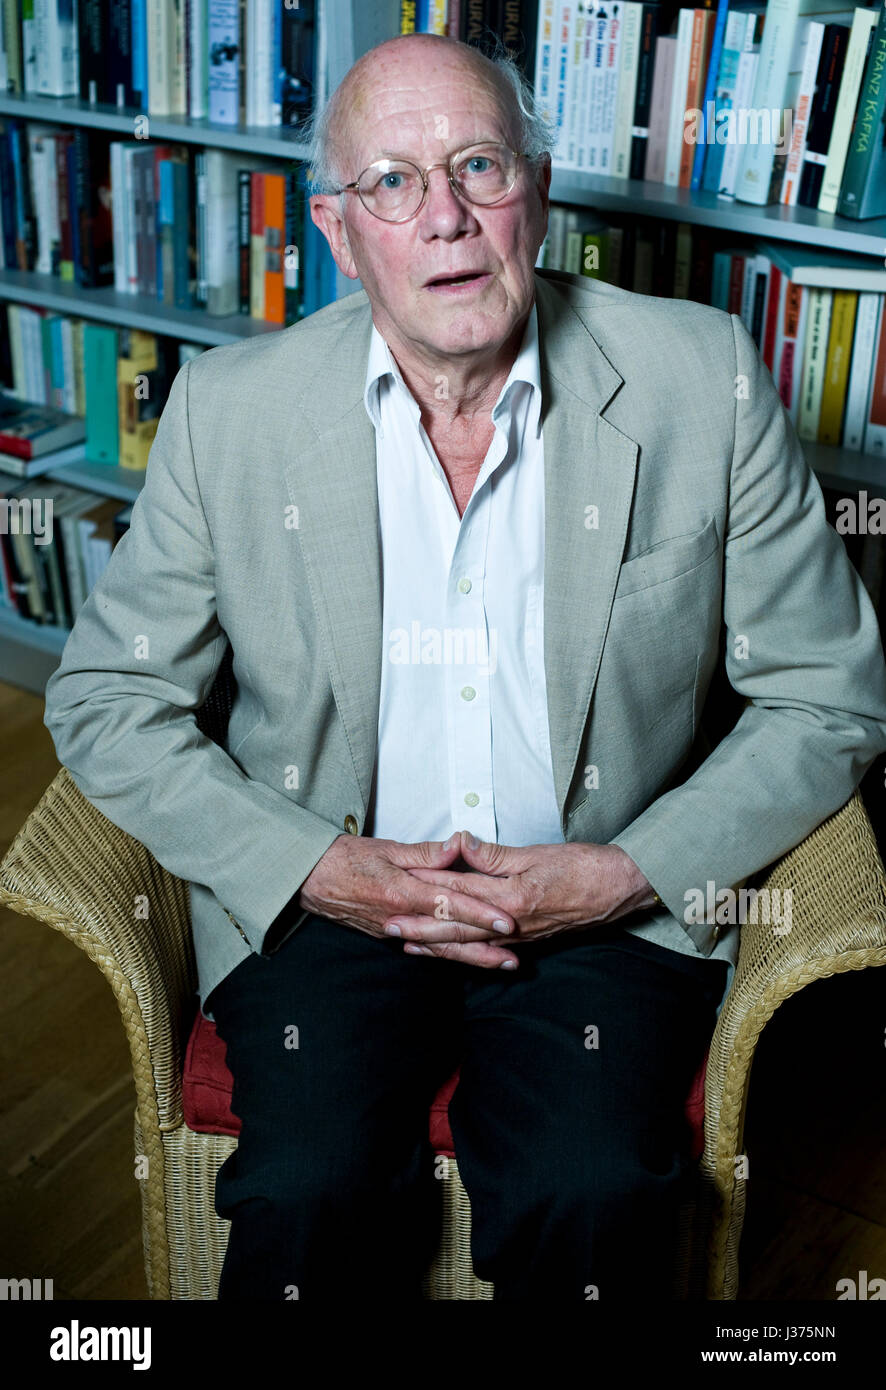 Sir Christopher Ricks, British literary critic and scholar, at the London Review of Books Bookshop, 30/07/2010. Stock Photo